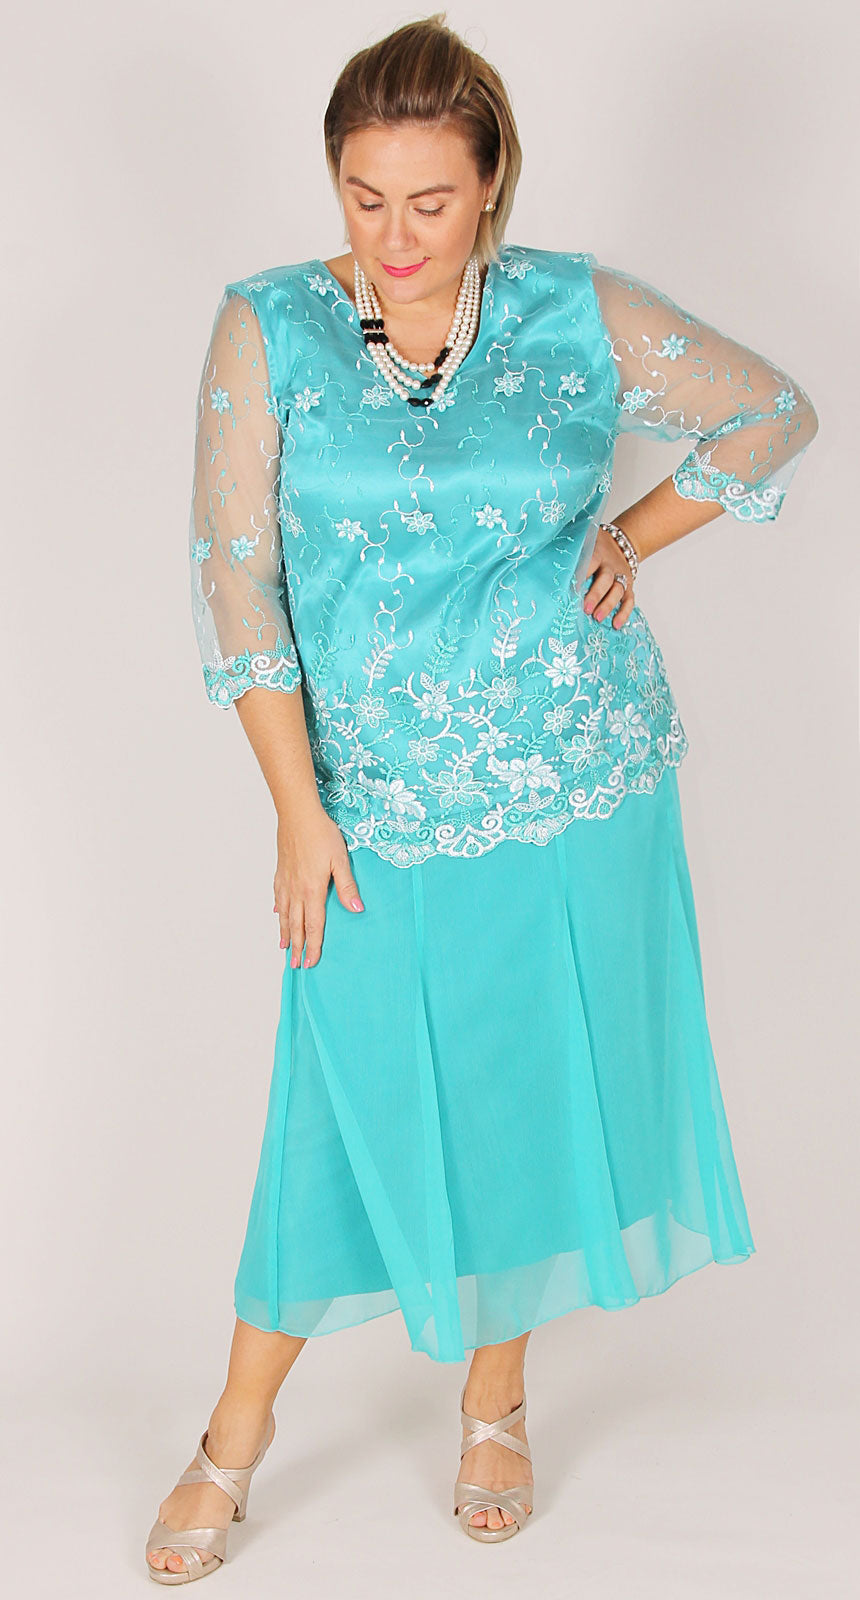 Turquoise Lace V-neck Top